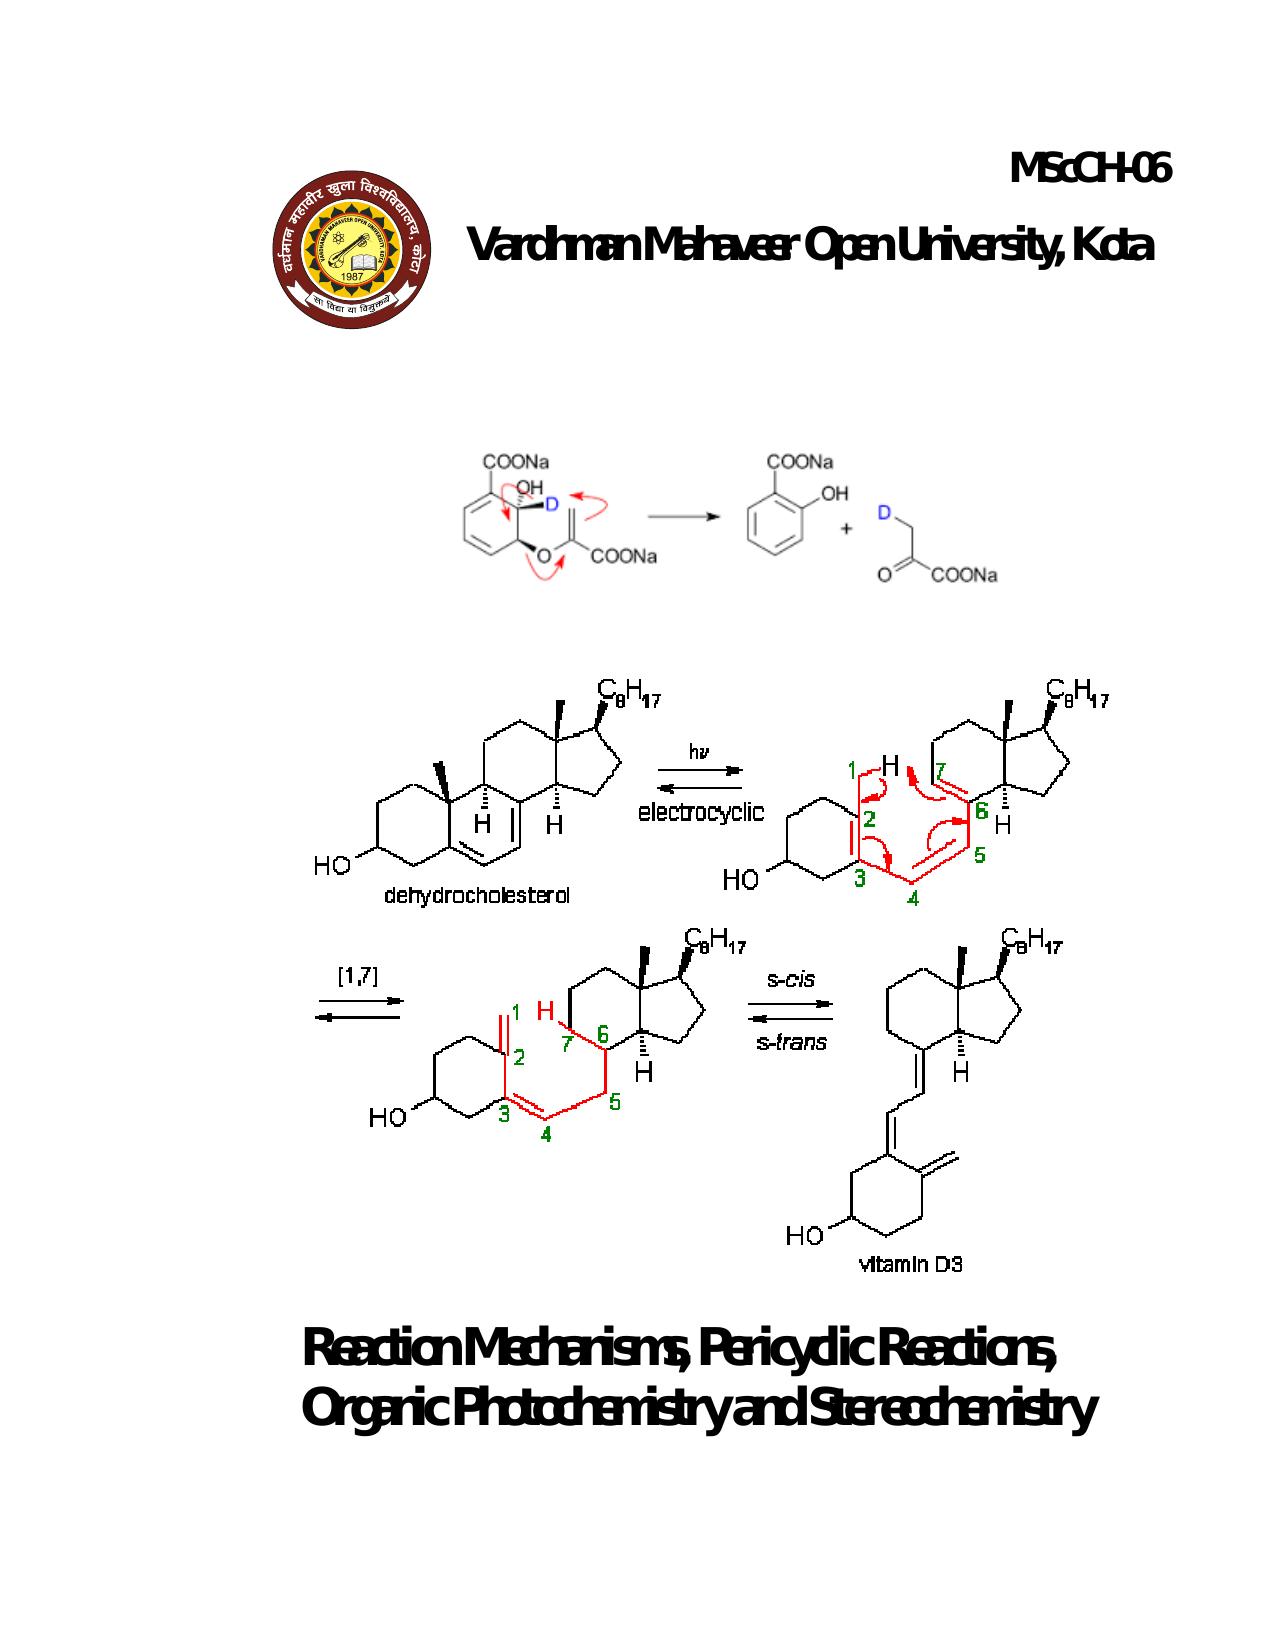 Reaction Mechanisms, Pericyclic Reactions, Organic Photochemistry and Stereochemistry